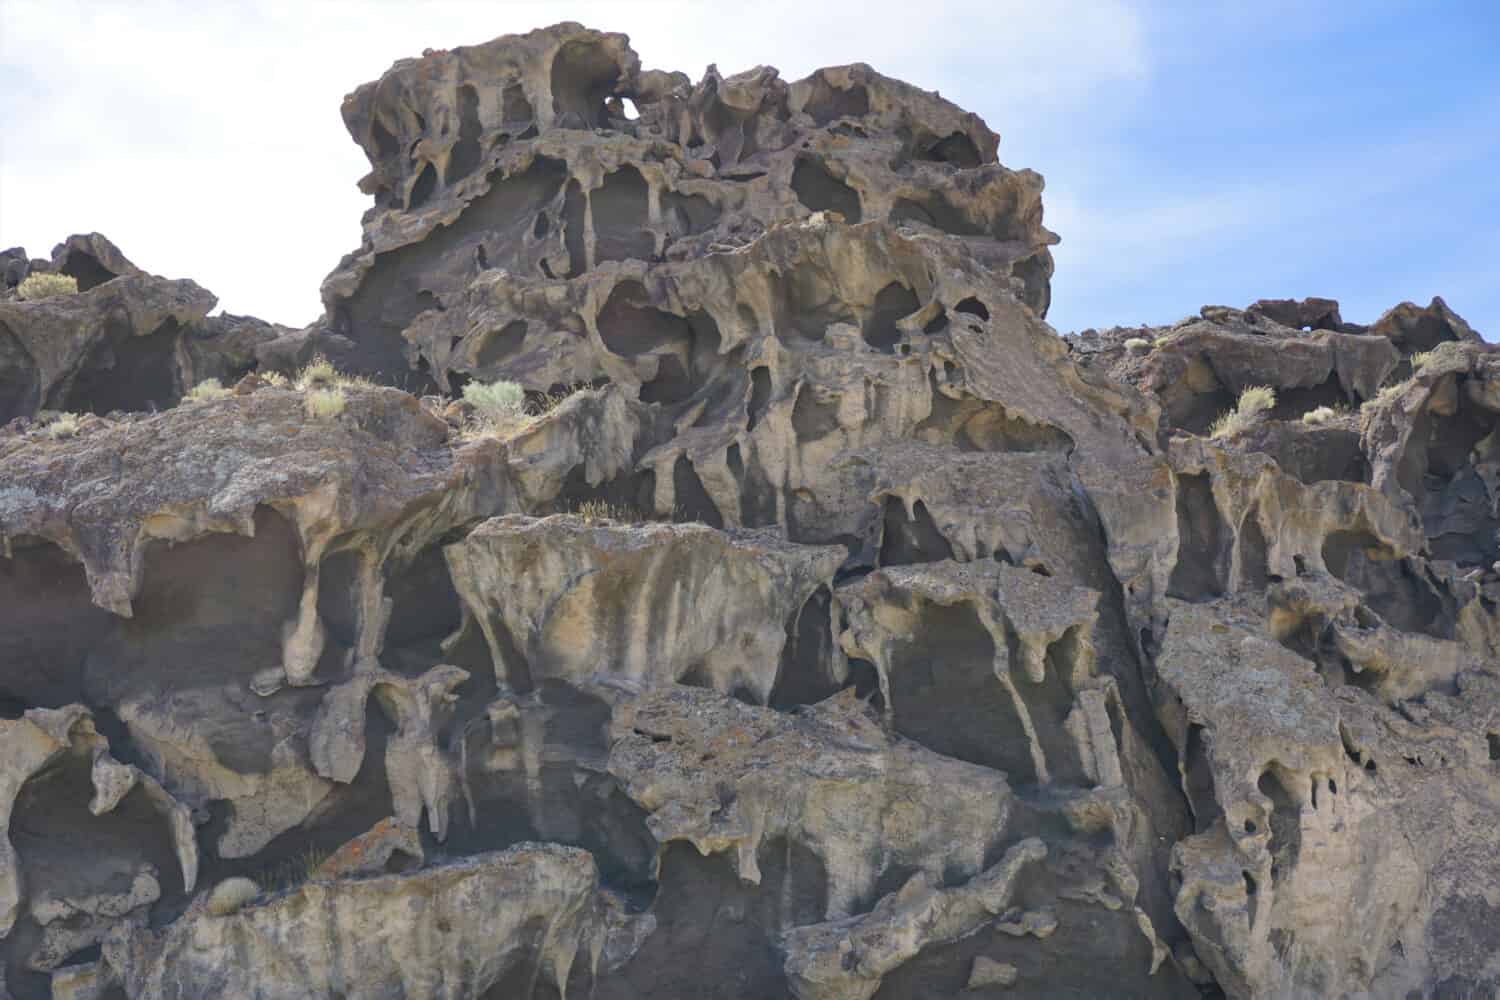 Close up view of a section of the volcanic cliff known as the Lace Curtain, Pahvant Butte in the Black Rock Desert, near Delta, Utah USA.